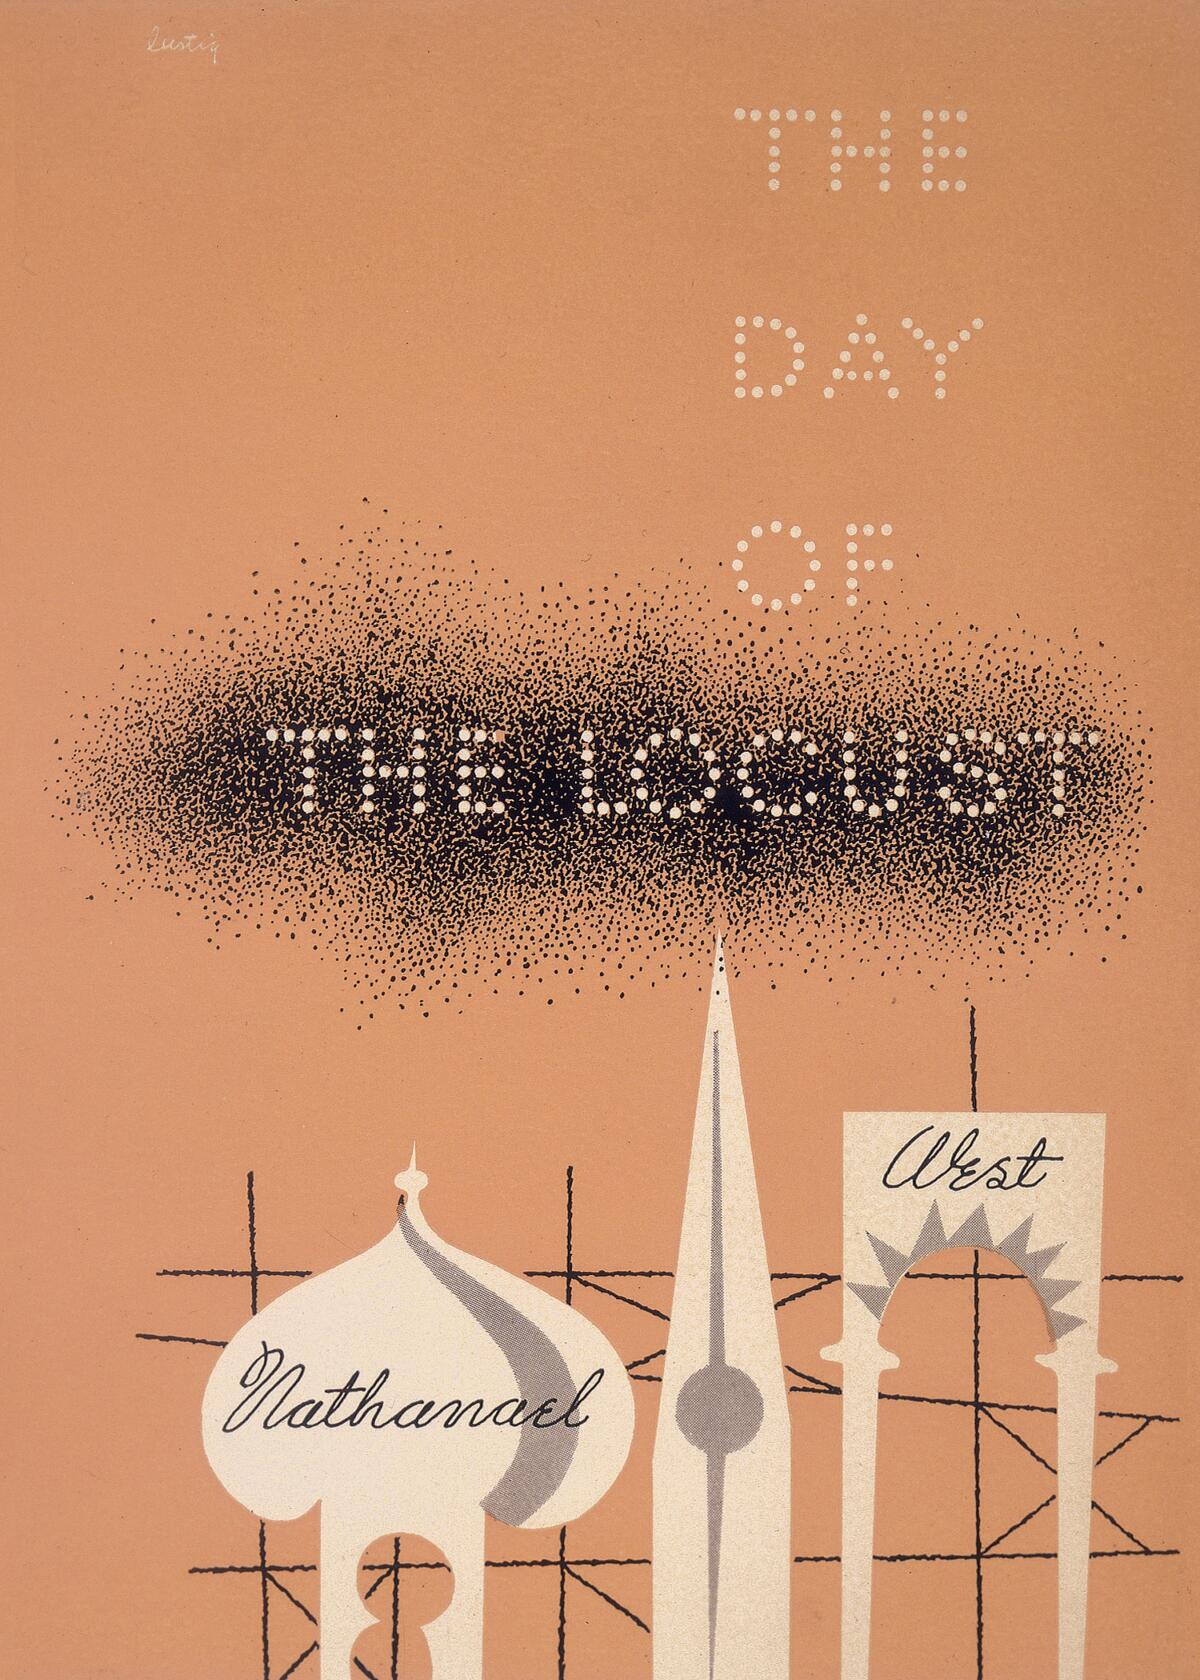 "The Day of the Locust" by Nathanael West